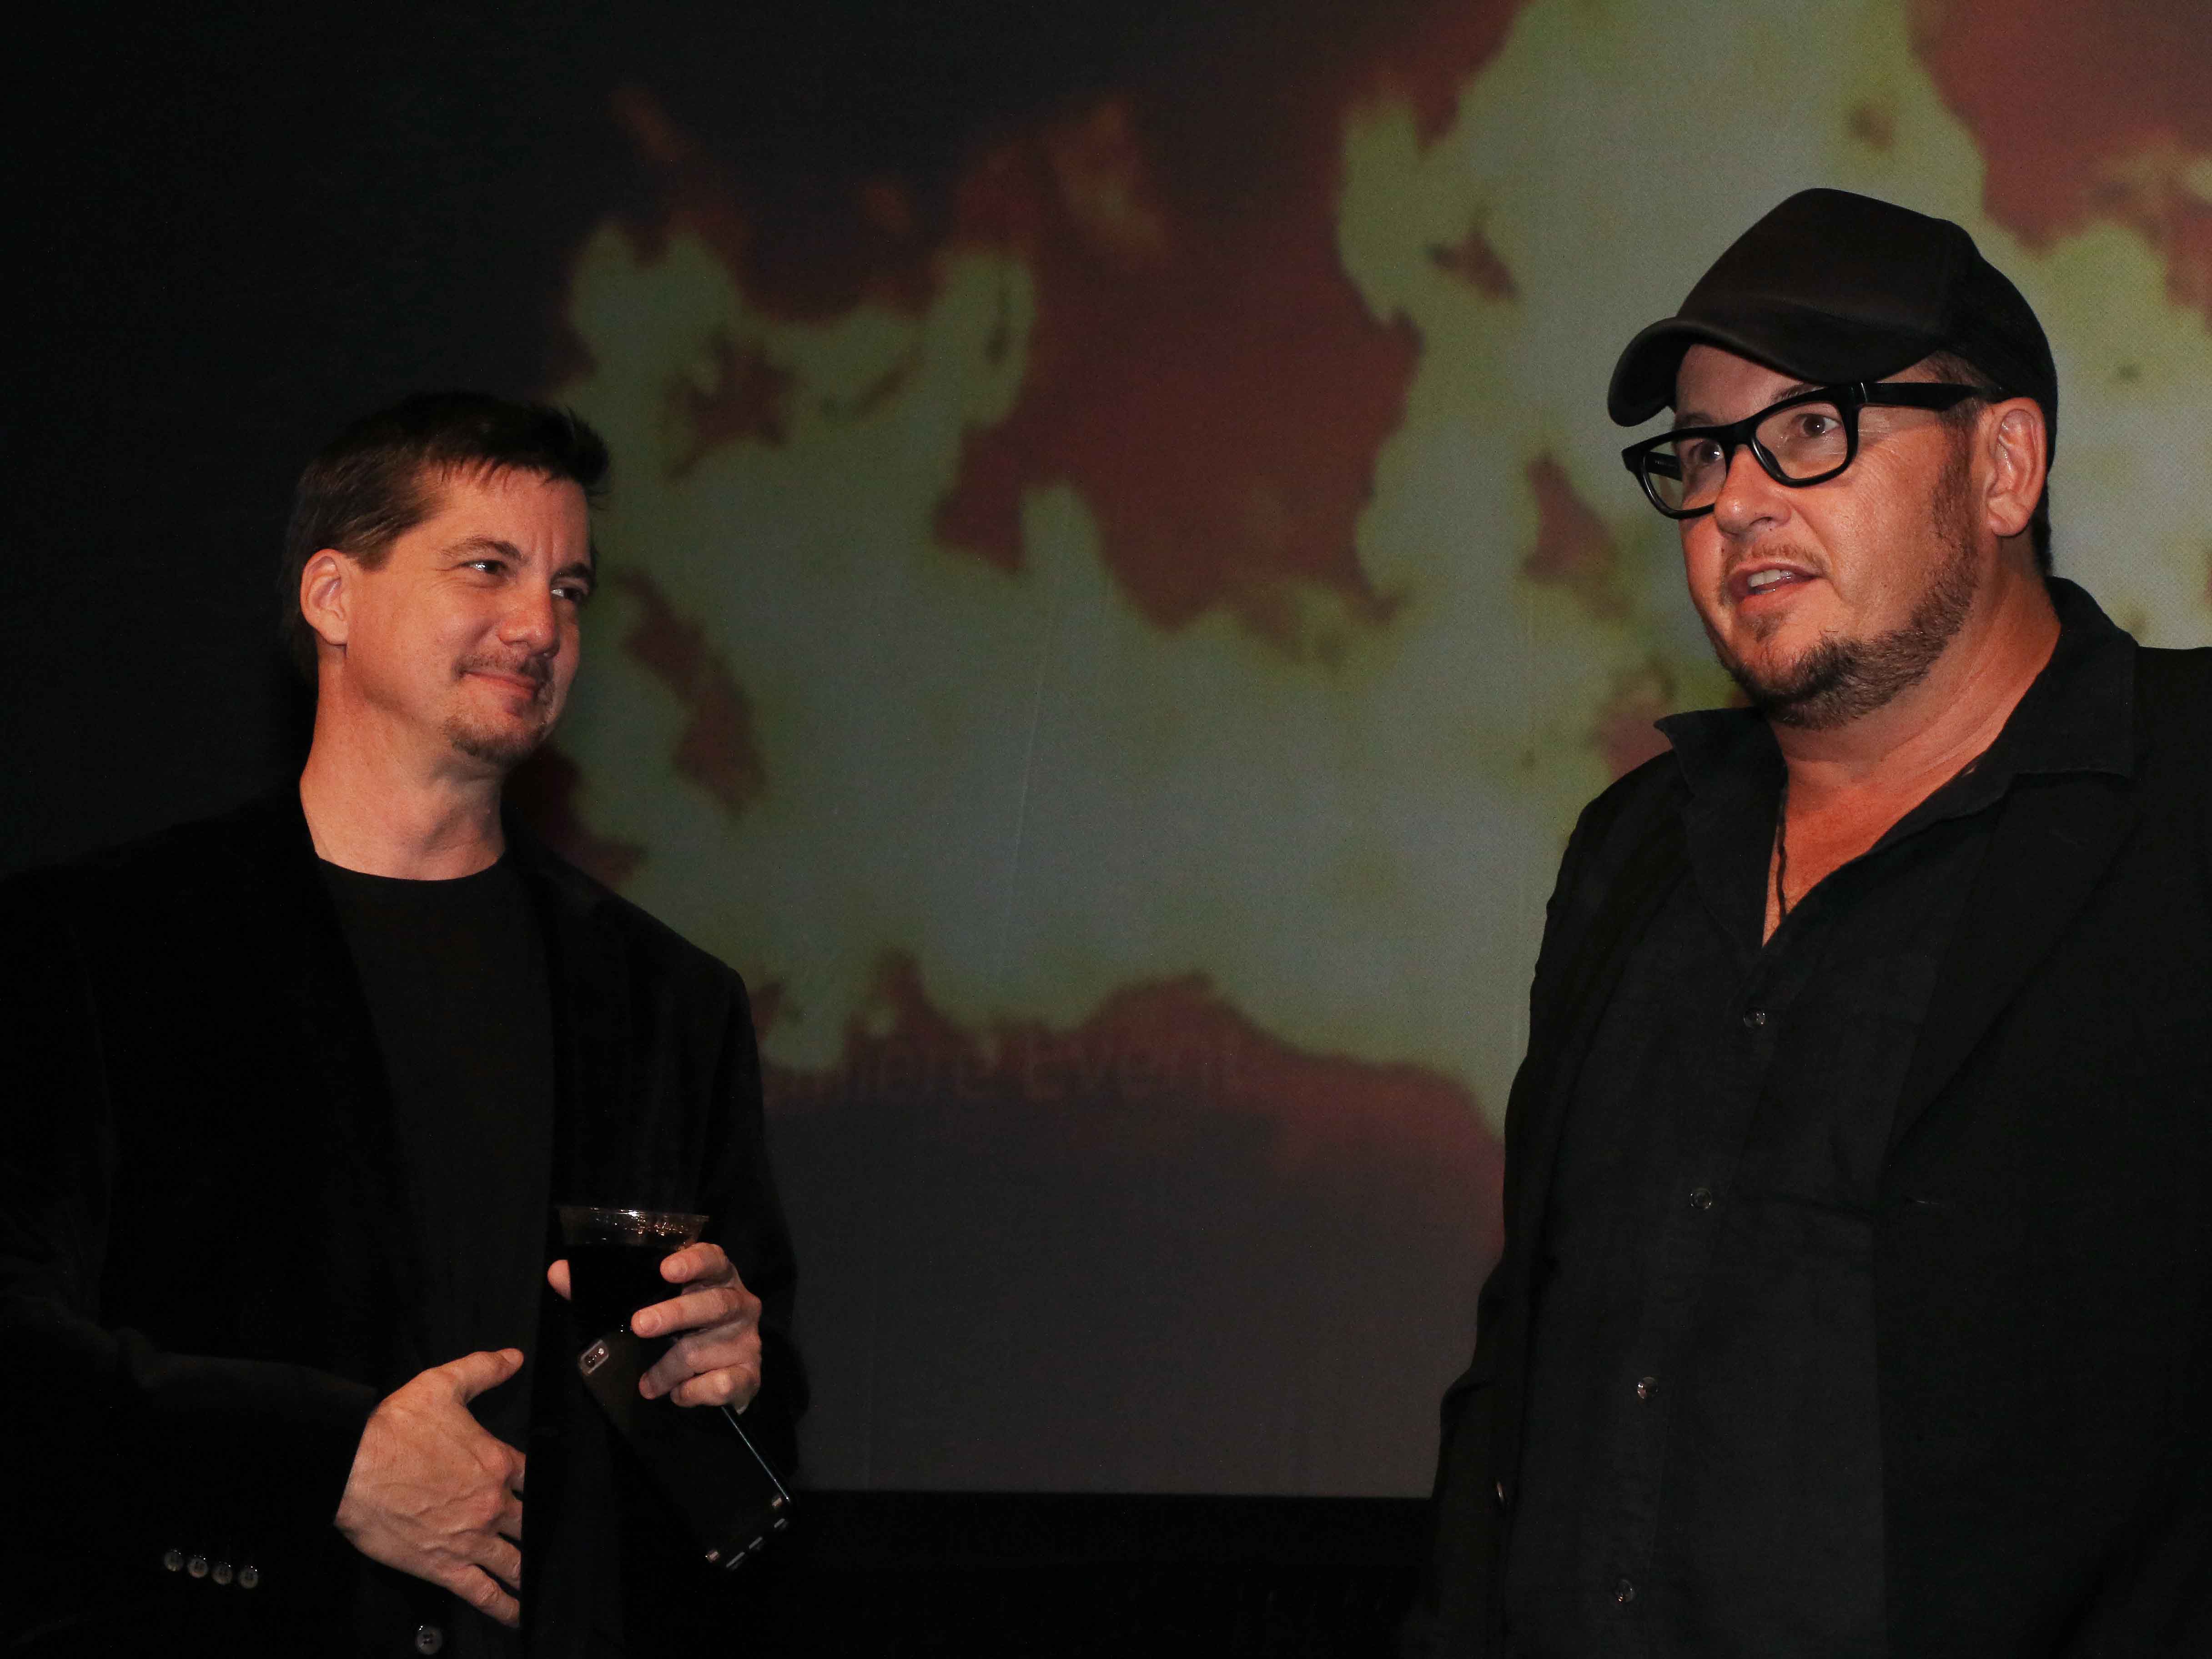 D.C. Douglas and Nick Lyons at the Isle of the Dead premiere